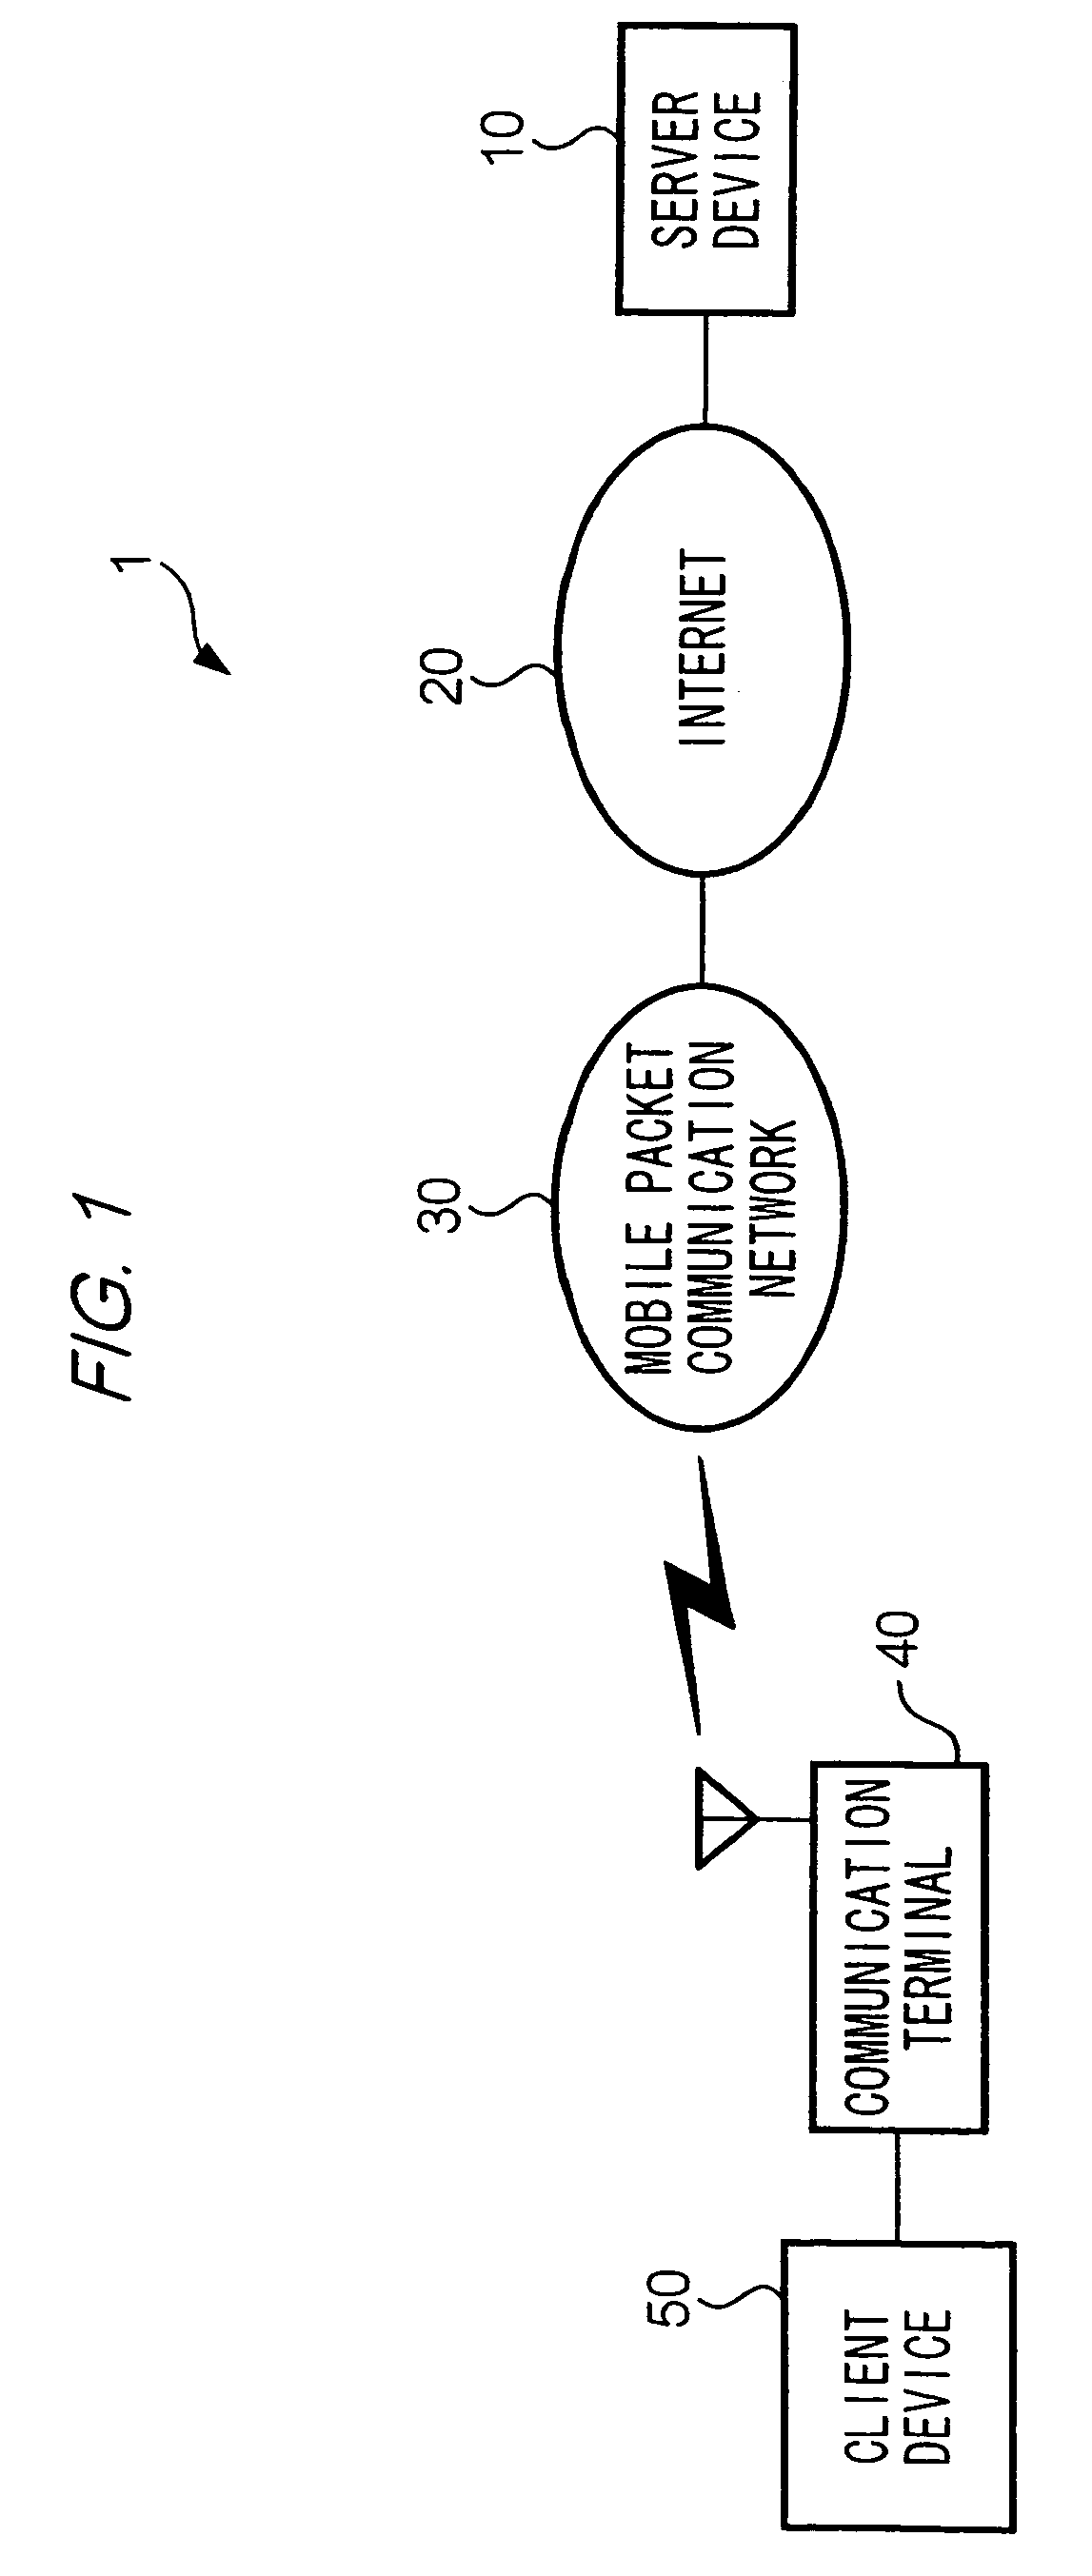 Transmission control method and system